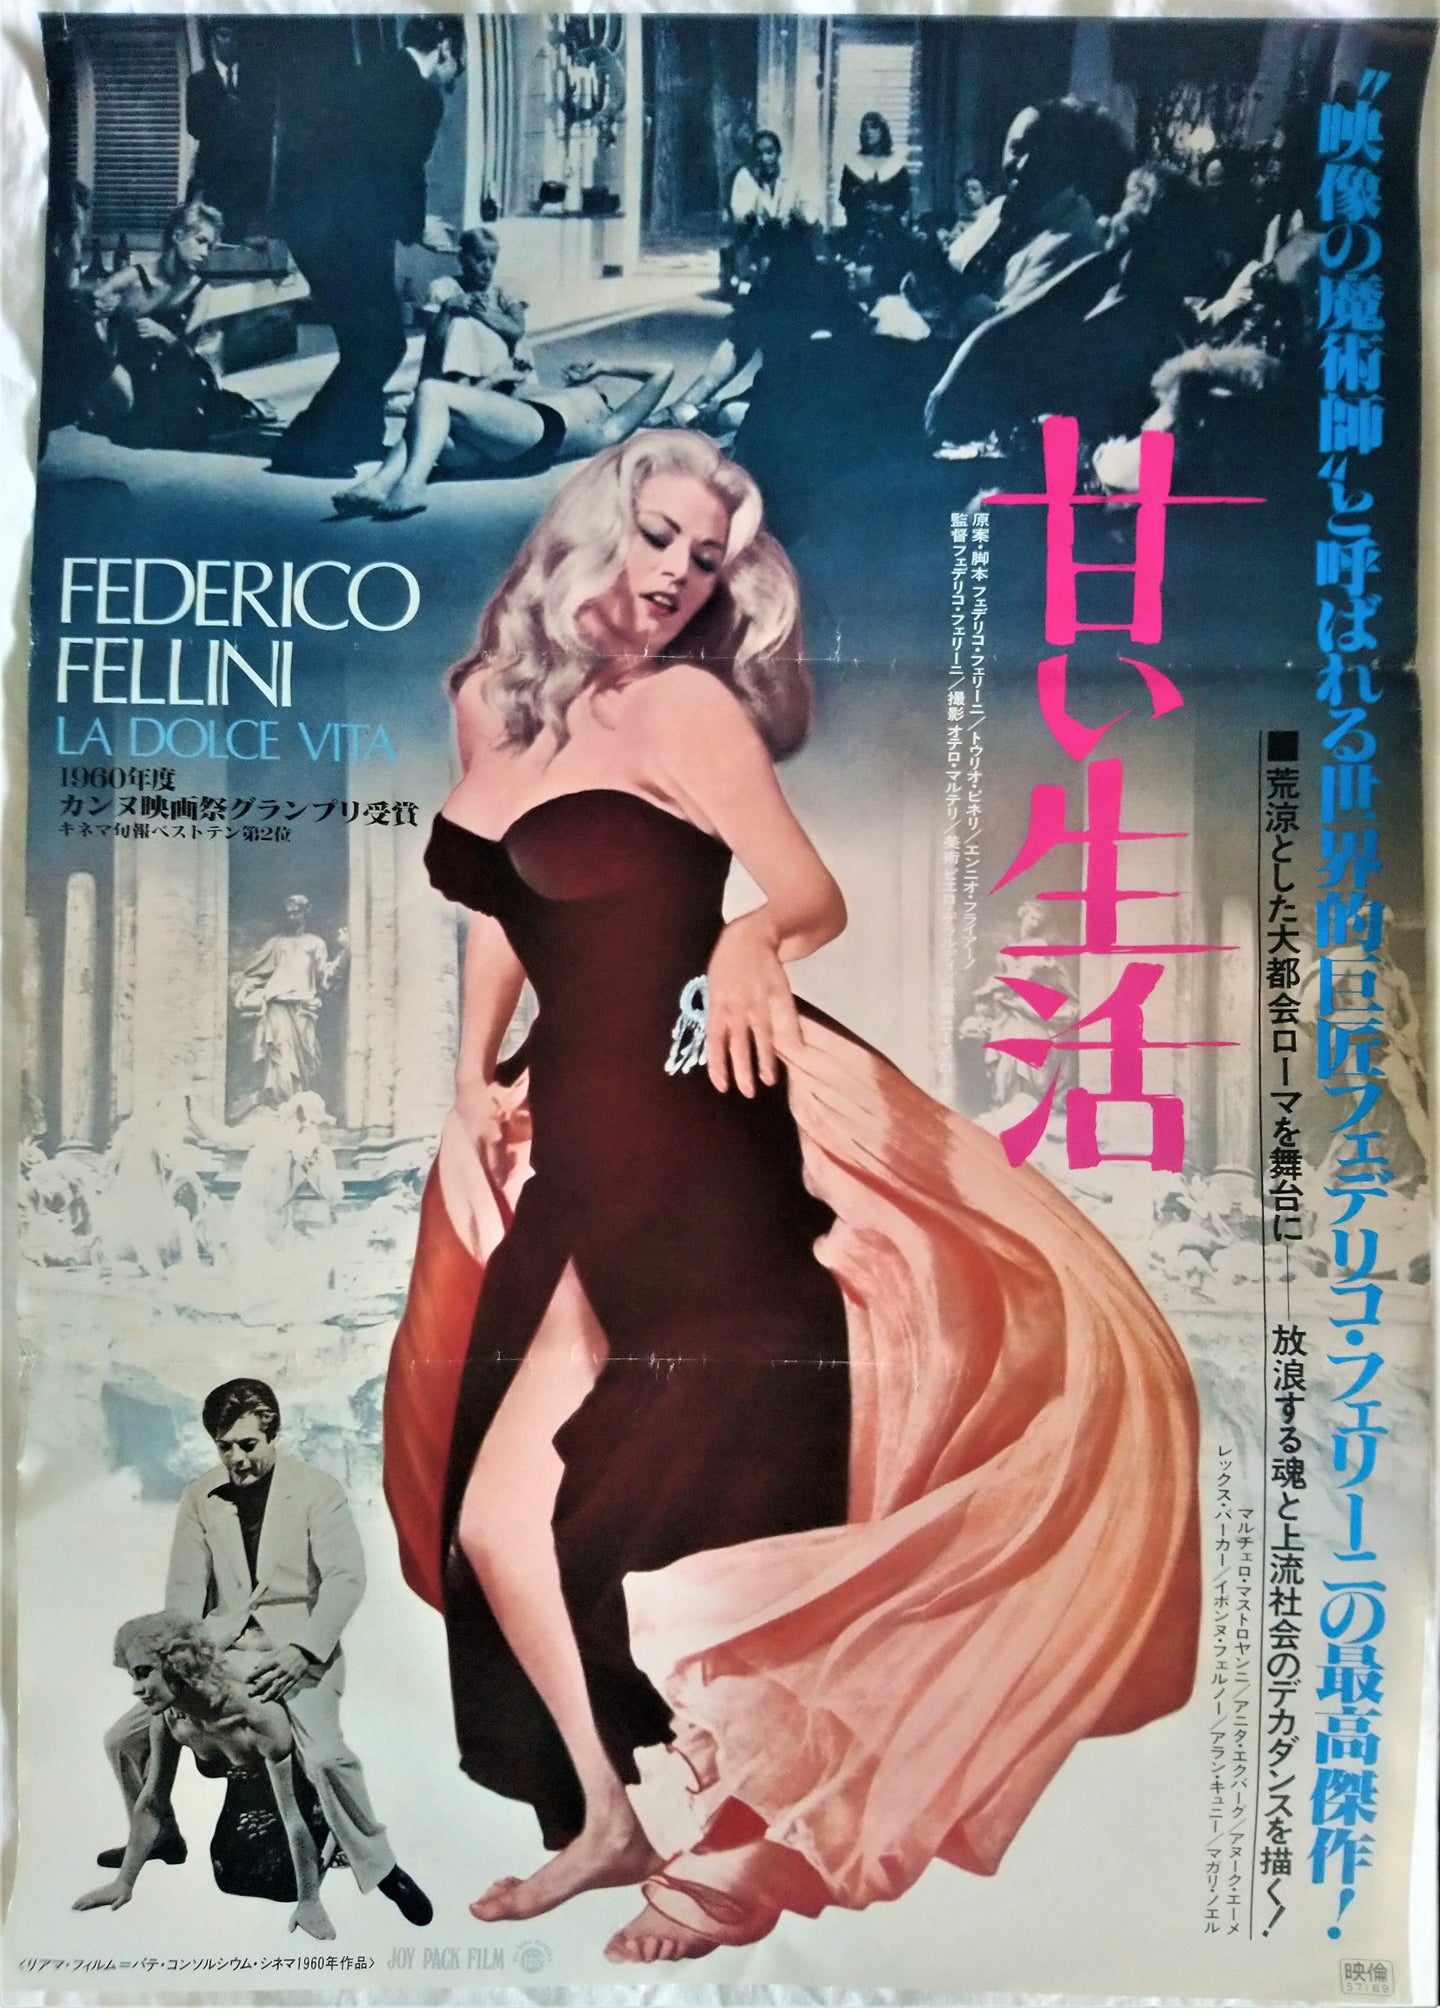 Japanese poster for the 1982 re-release of Federico Fellini's masterpiece.  Federico Fellini's episodic, existential look at the jaded emptiness of modern life stars Marcello Mastroianni as a journalist who spends his days trying to find a meaning to life and discovering in the end that there really isn't any. A beautiful image of star Anita Ekberg dominates this gorgeous original film poster.